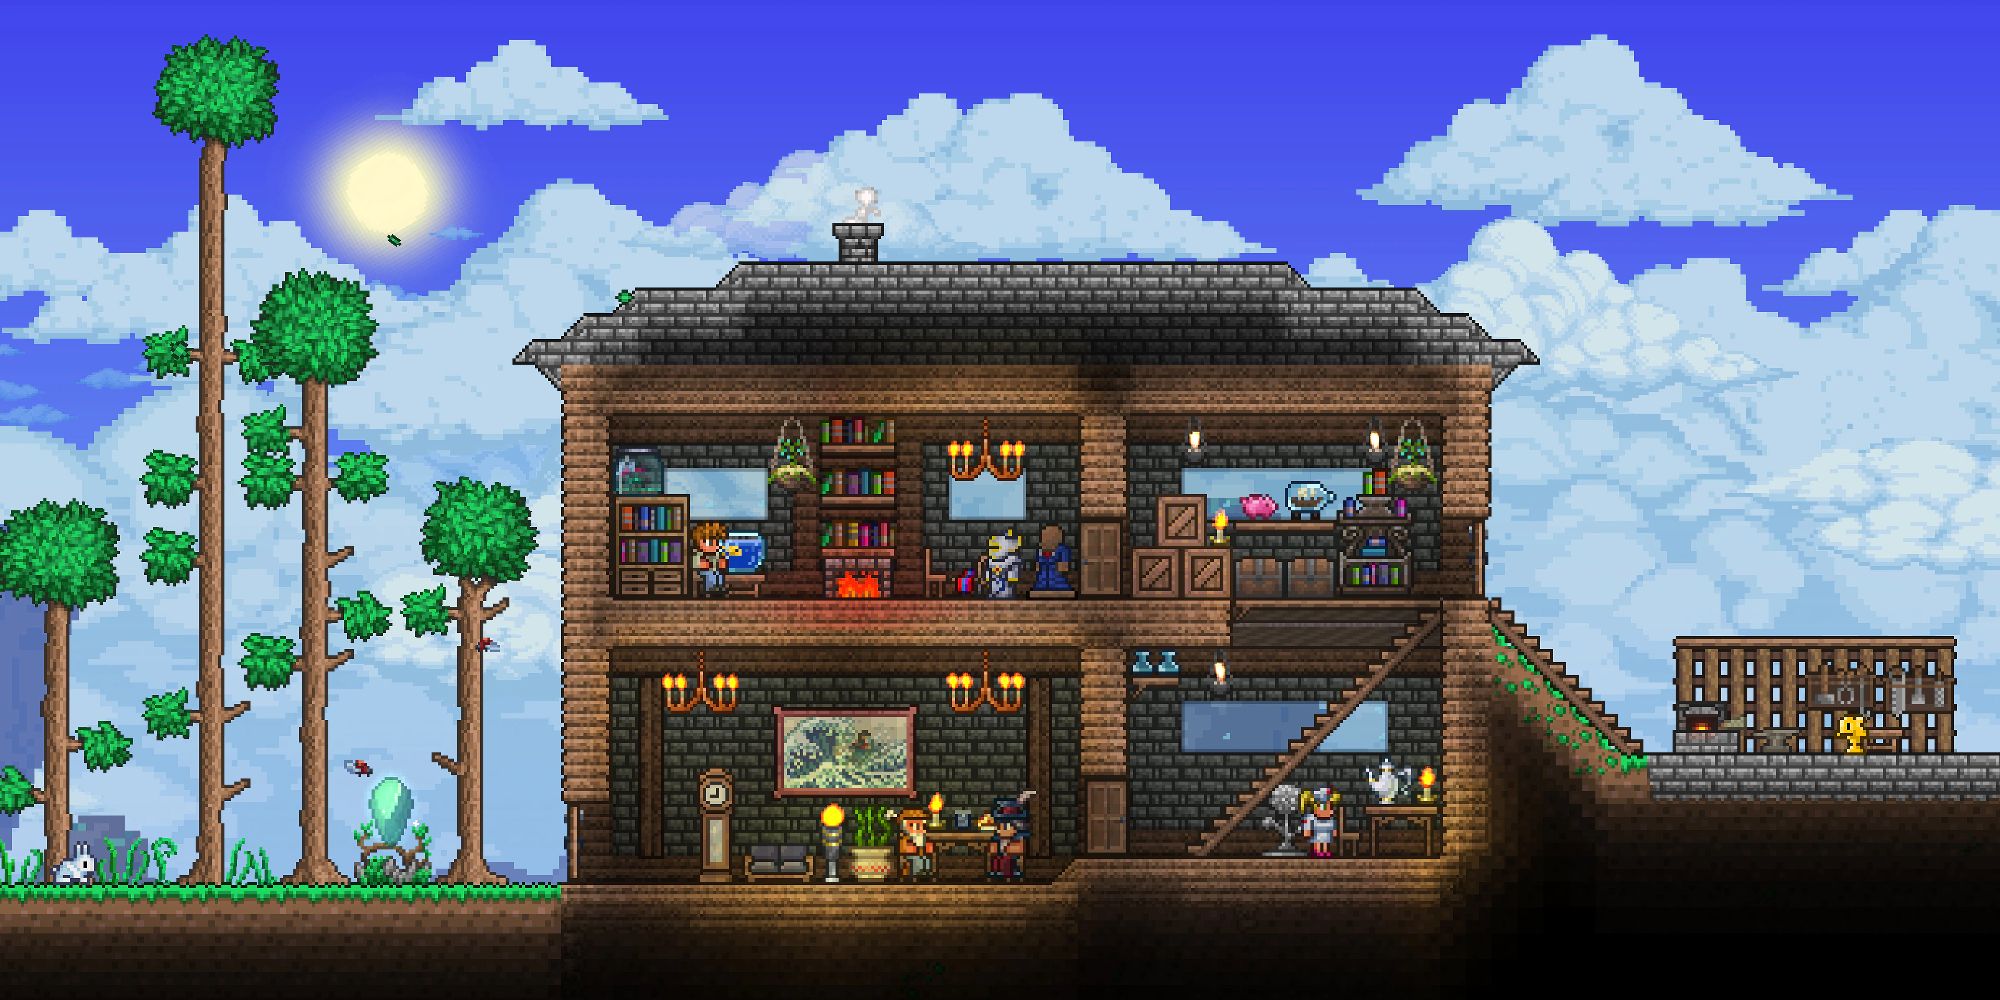 Terraria Review - Building Your Own Fun In A Dangerous World - Game Informer